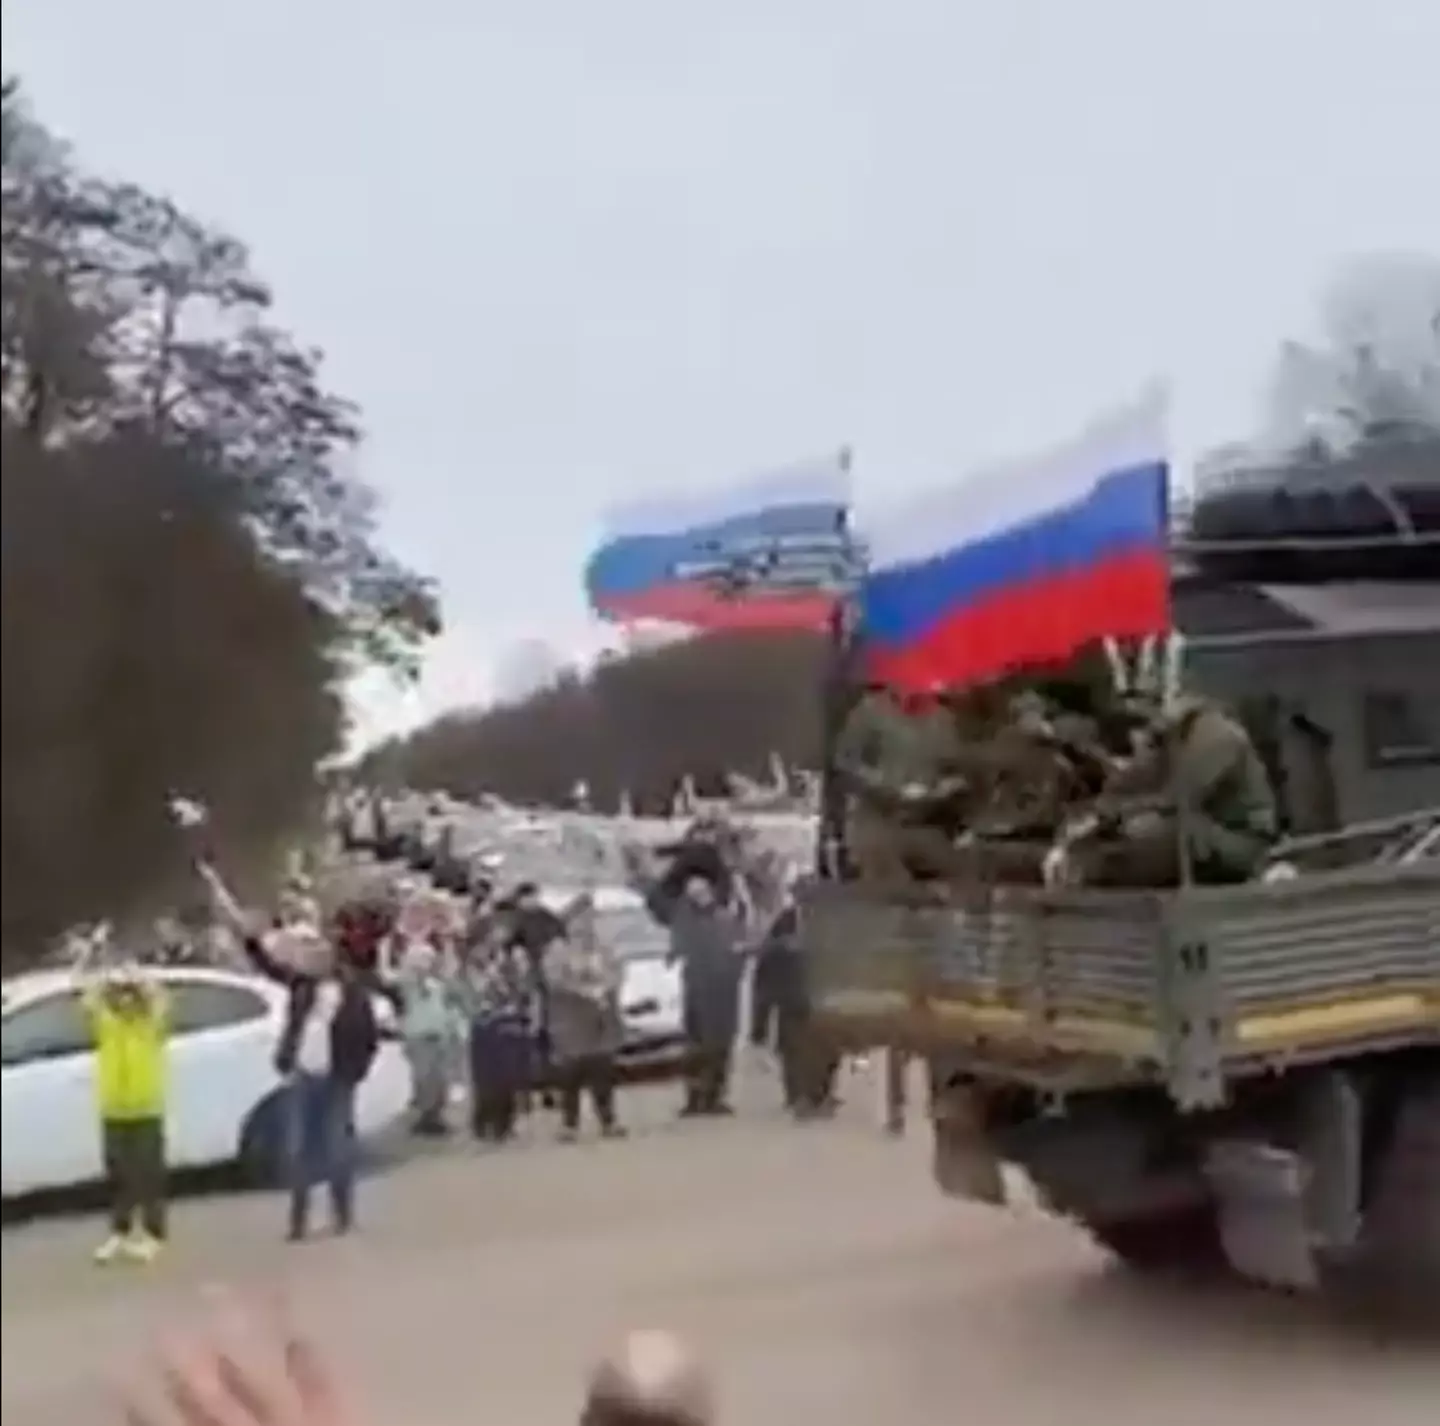 Crowds of people gather to wave off Russian troops on their way to fight in Putin's 'special military operation' in Ukraine.